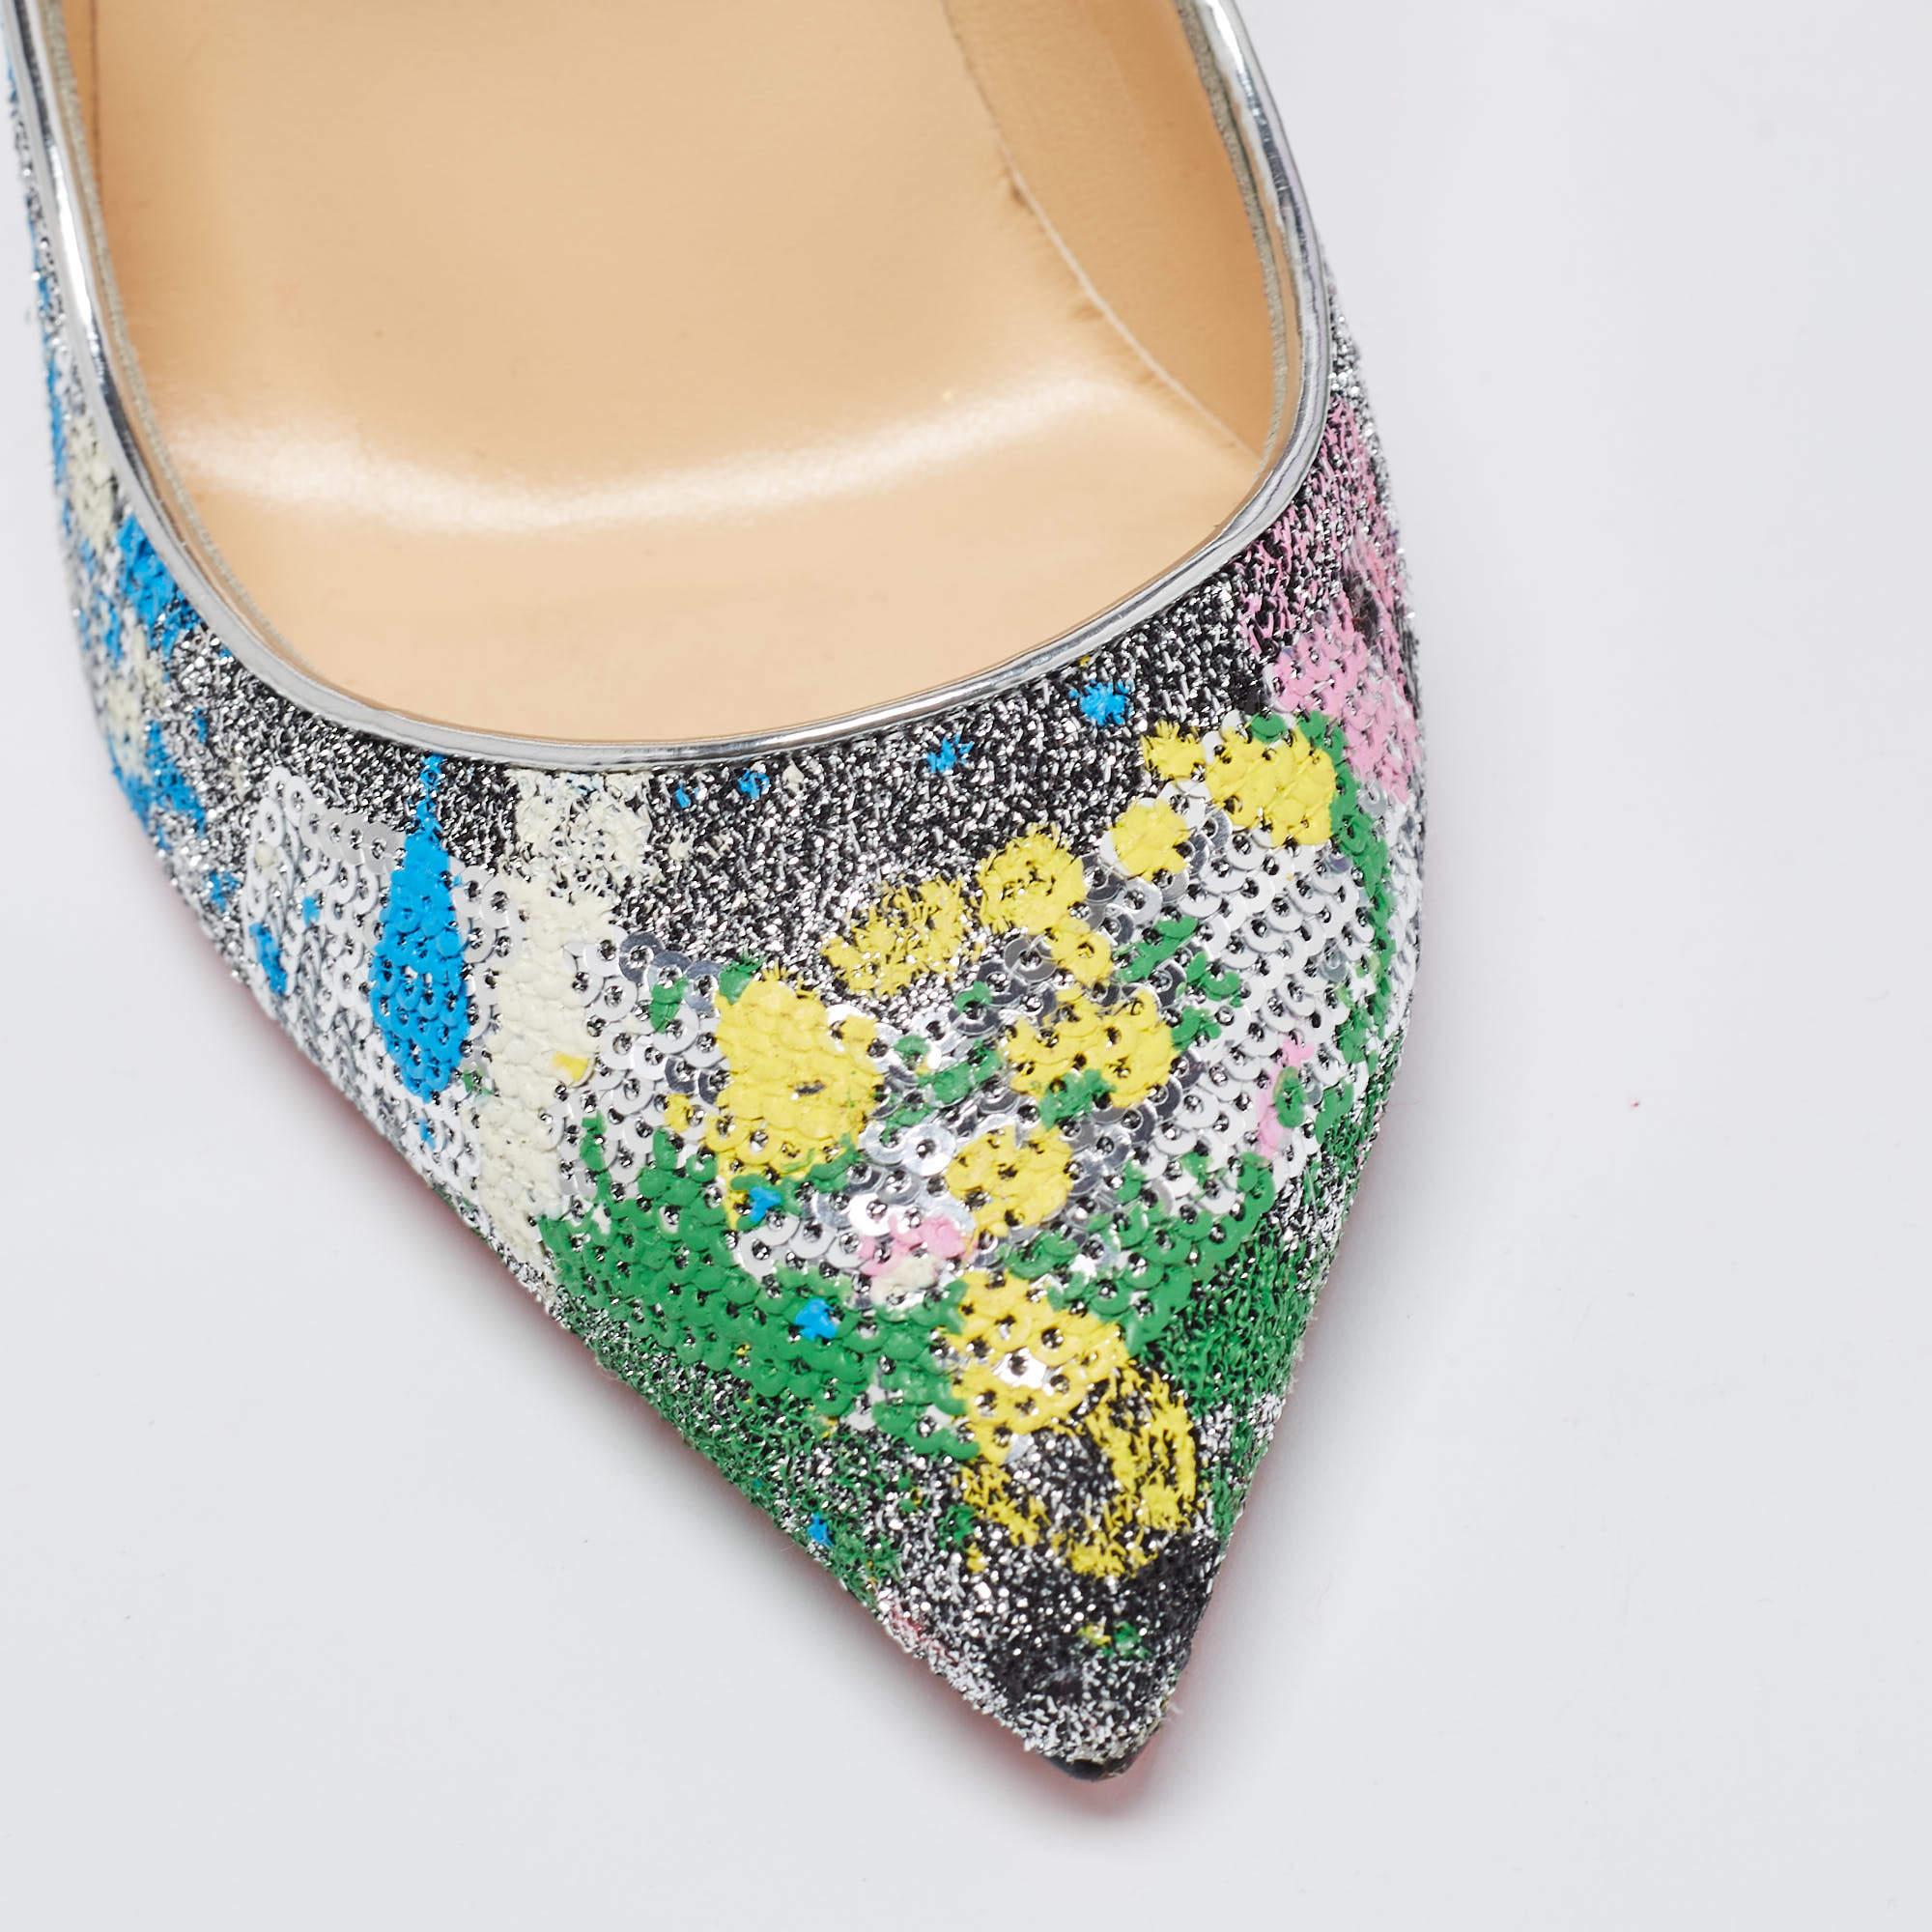 Christian Louboutin Multicolor Sequins and Brocade Pointed Toe Pumps Size 38 2